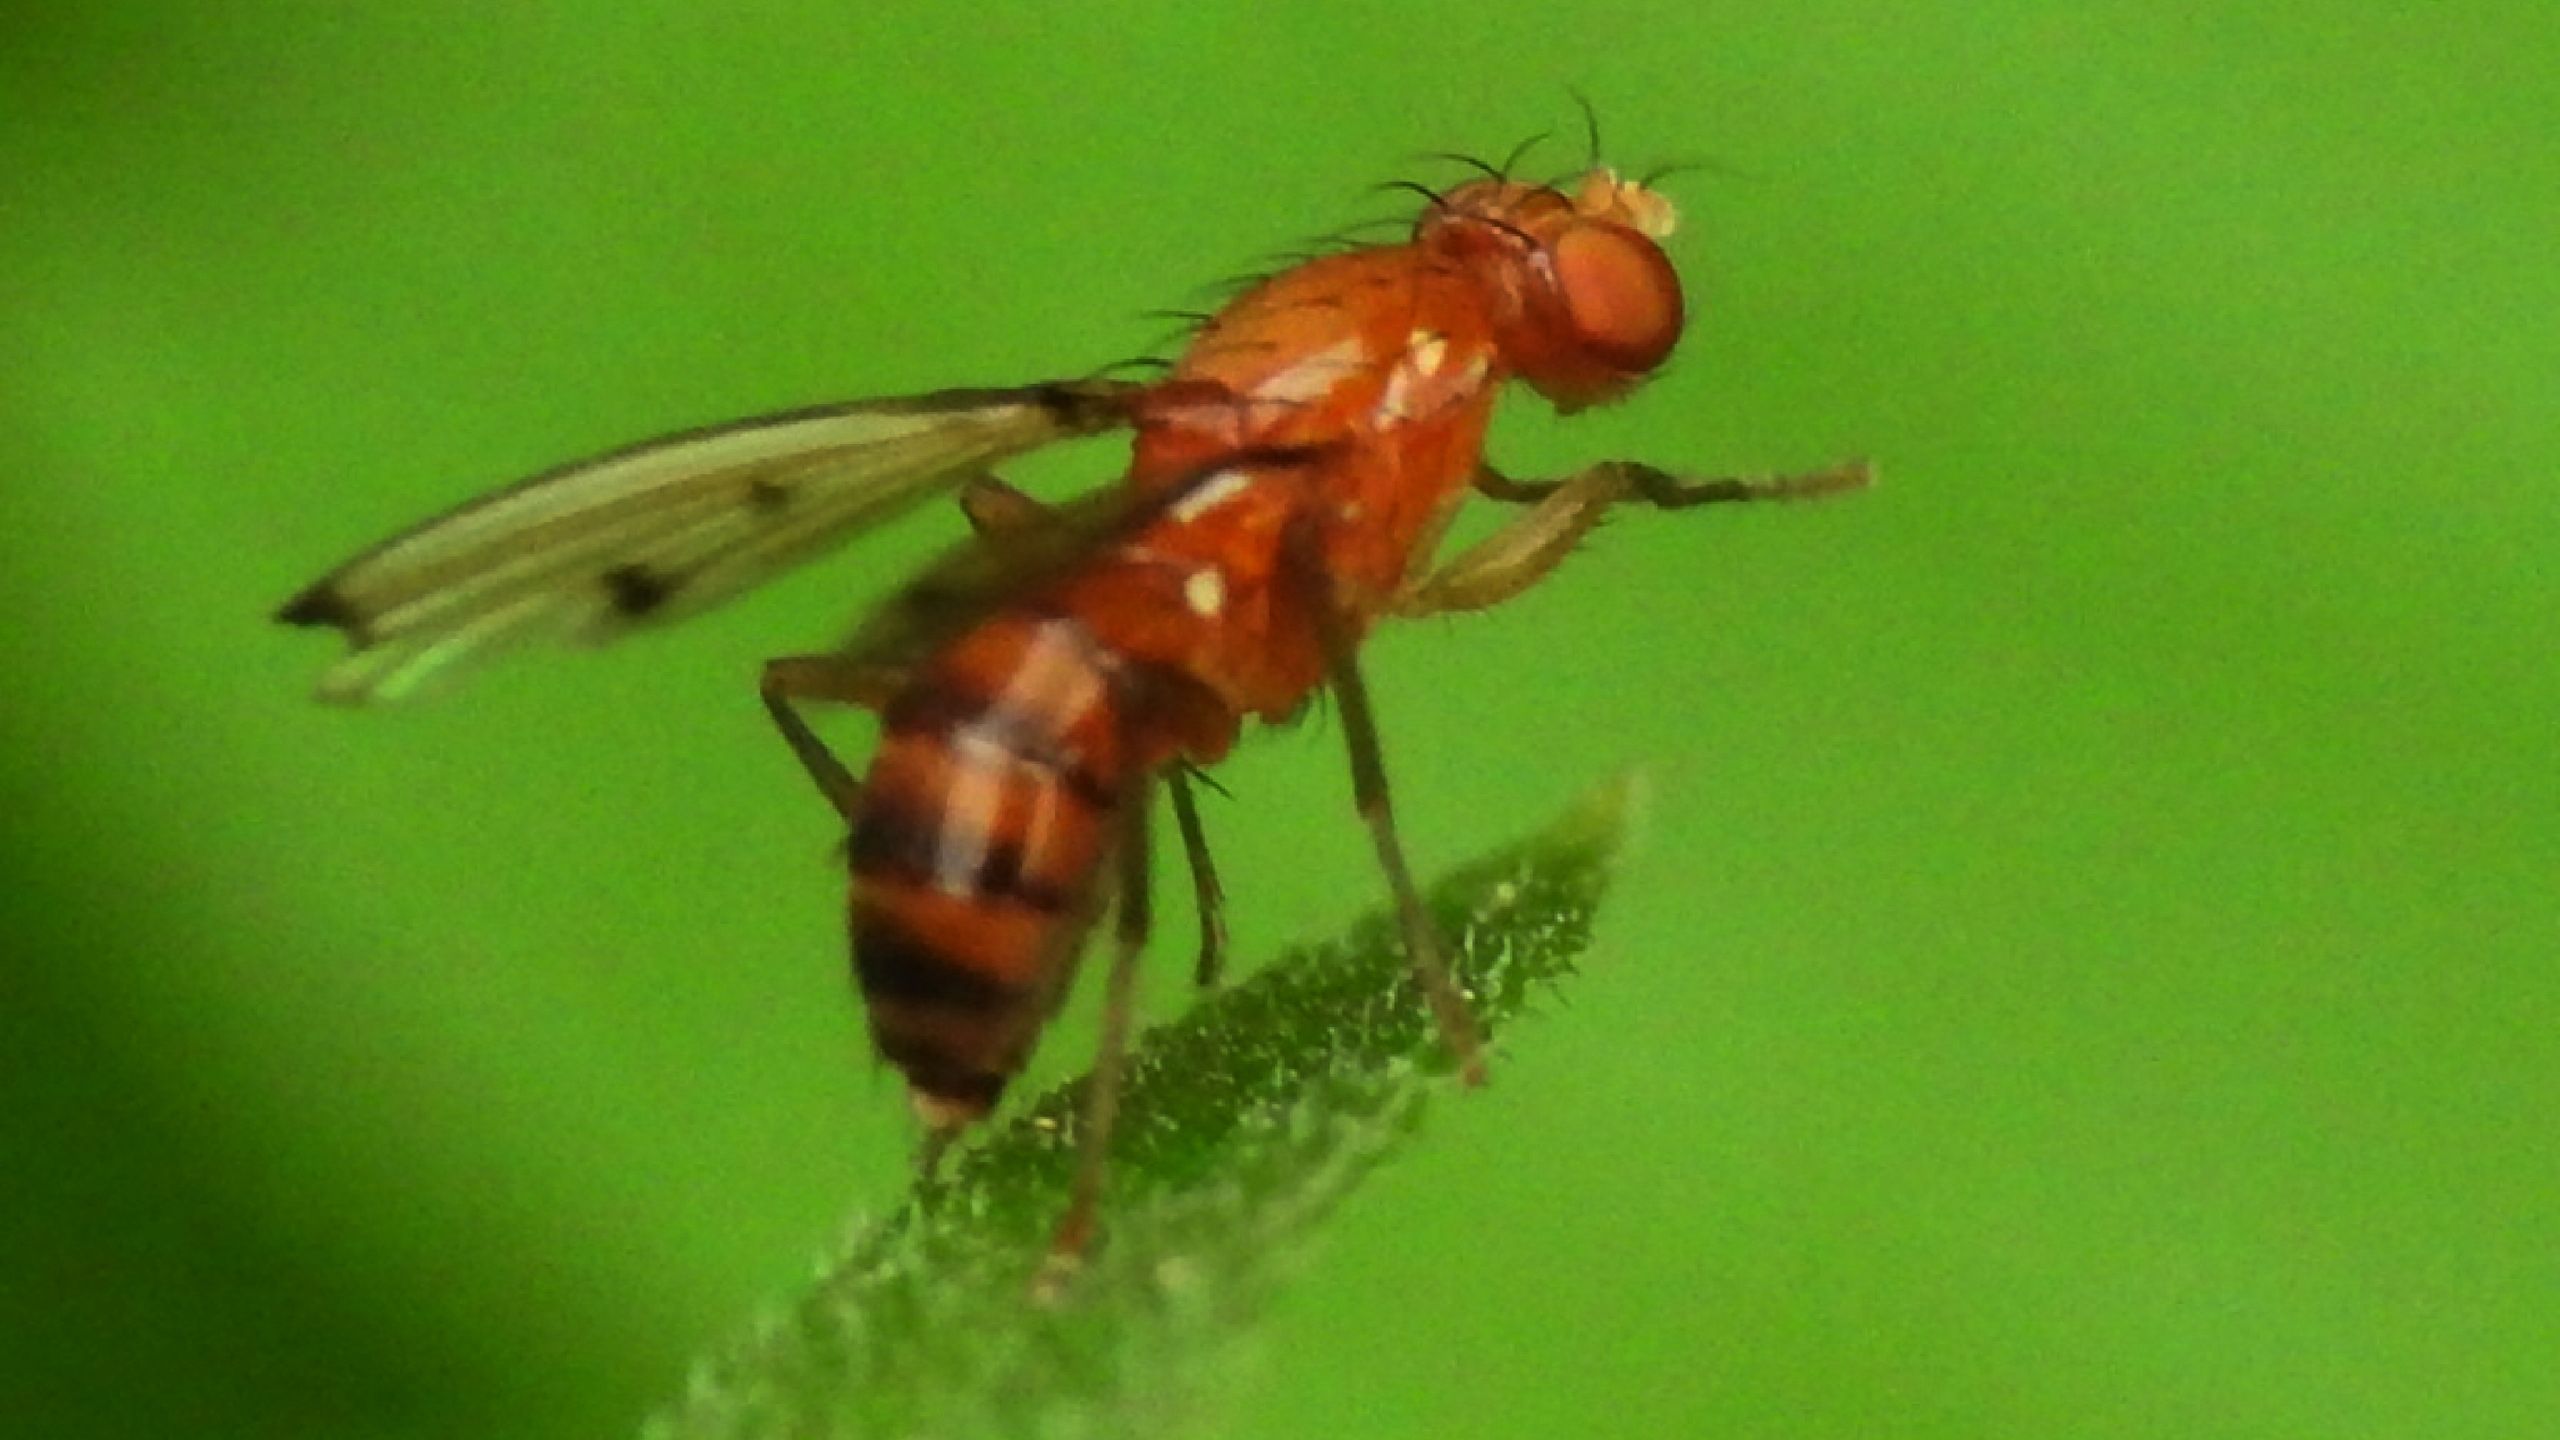 Male (left) and female (right) spotted wing drosophila (SWD)